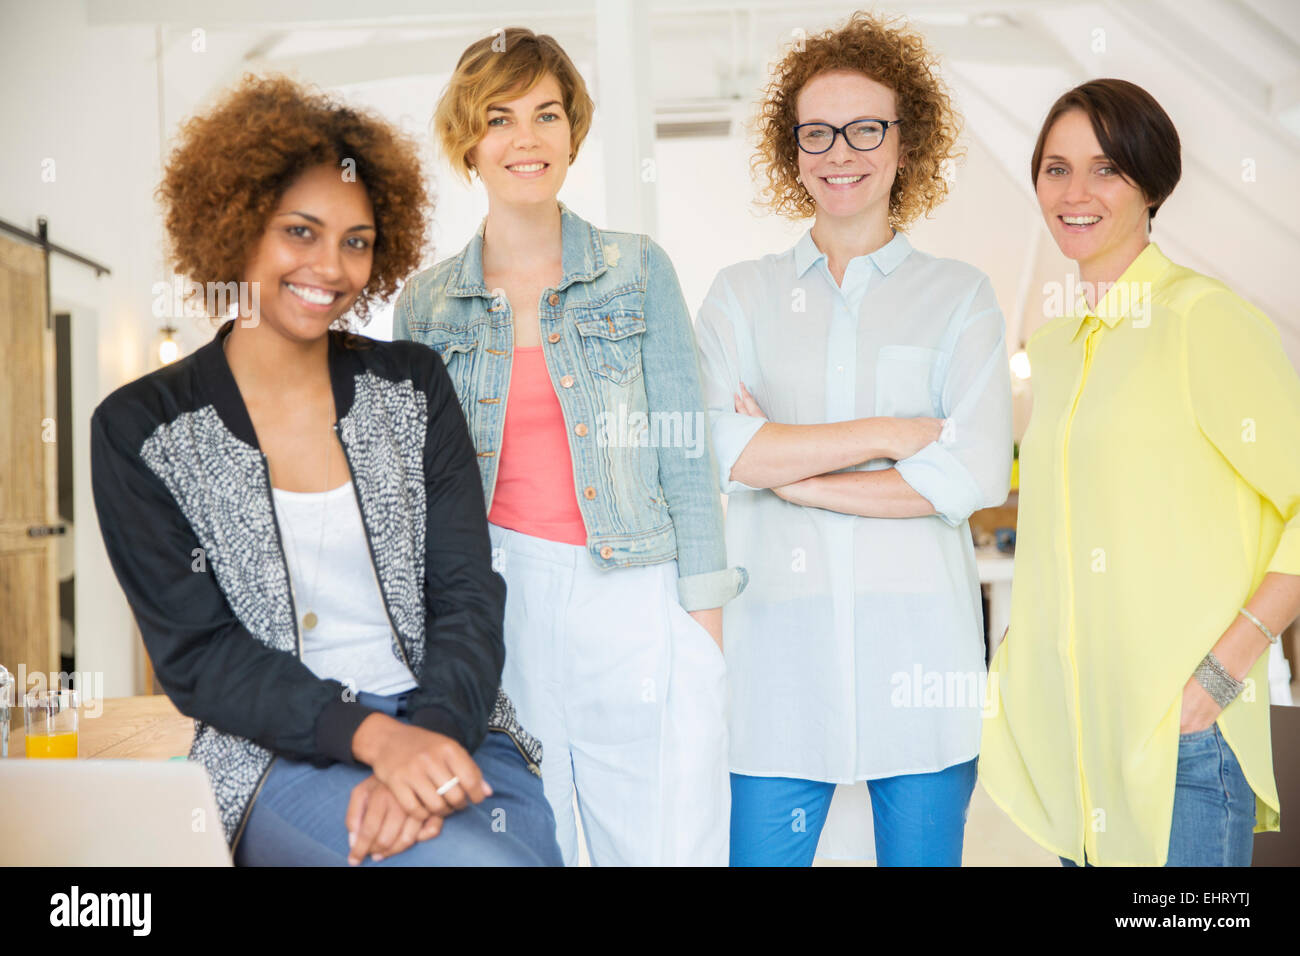 Group of smiling women at work Stock Photo